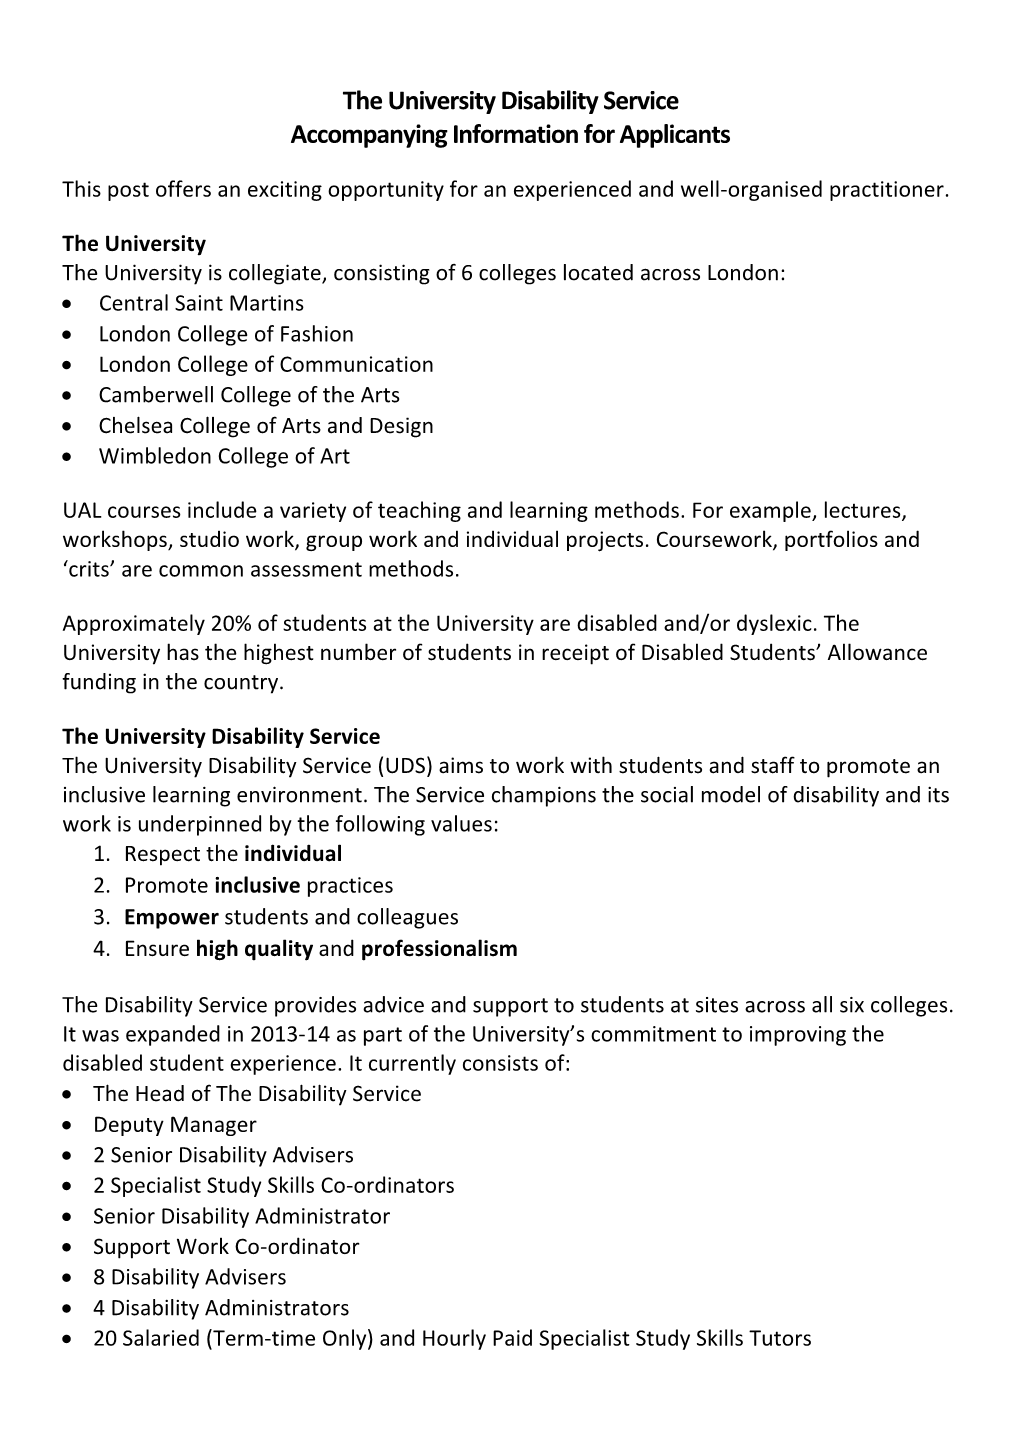 The University Disability Service Accompanying Information for Applicants